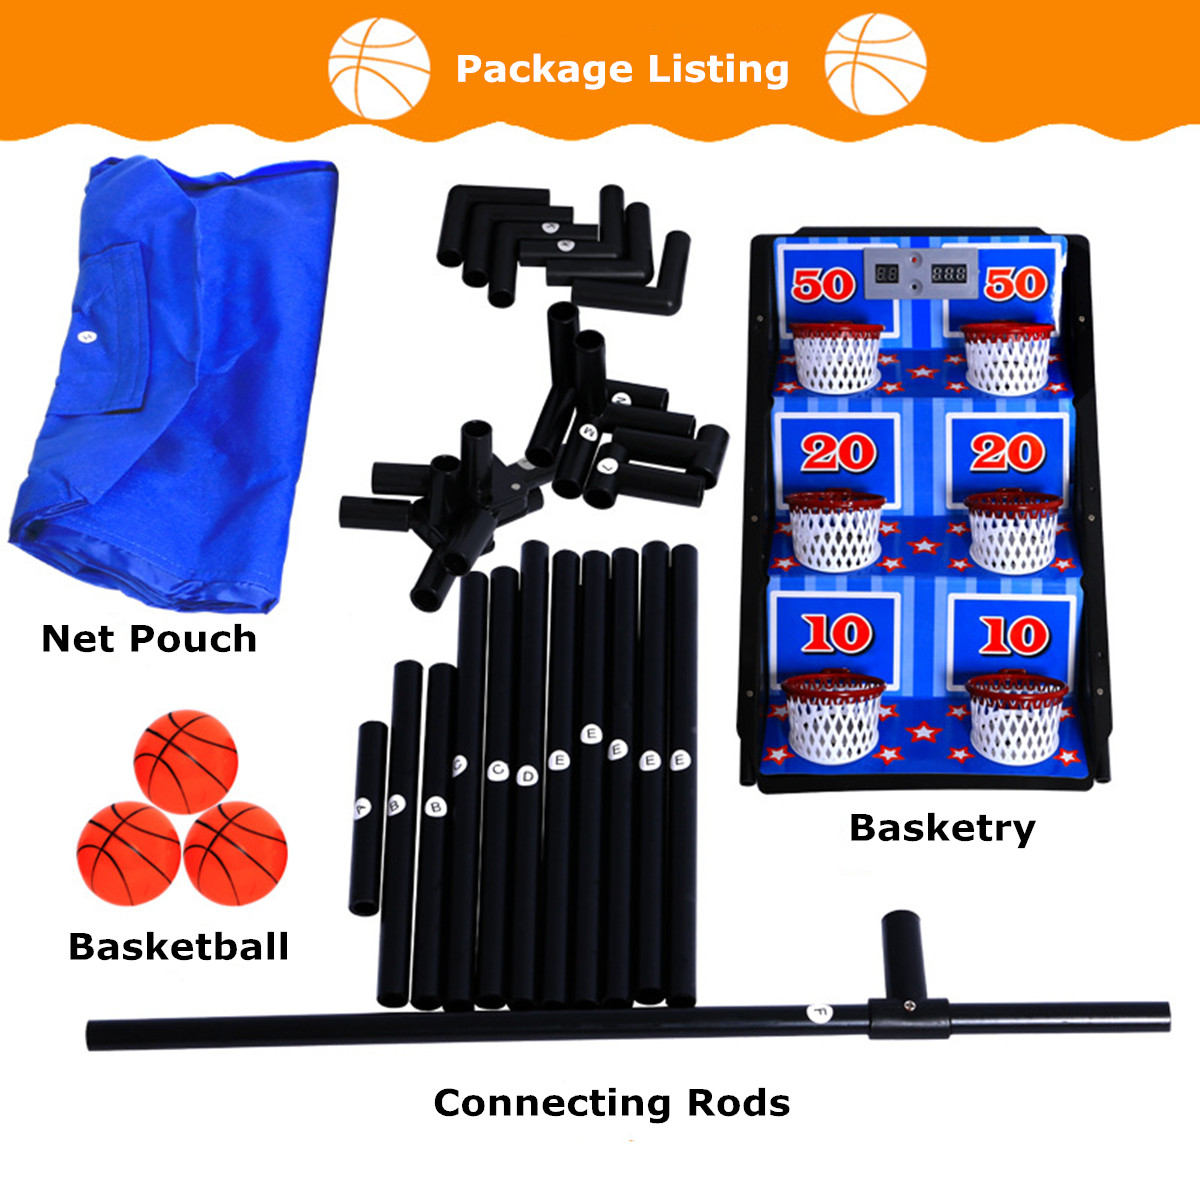 Kids-Basketball-Shooting-Machine-Electronic-LED-Scoring-Record-Home-Indoor-Toy-Gift-1342632